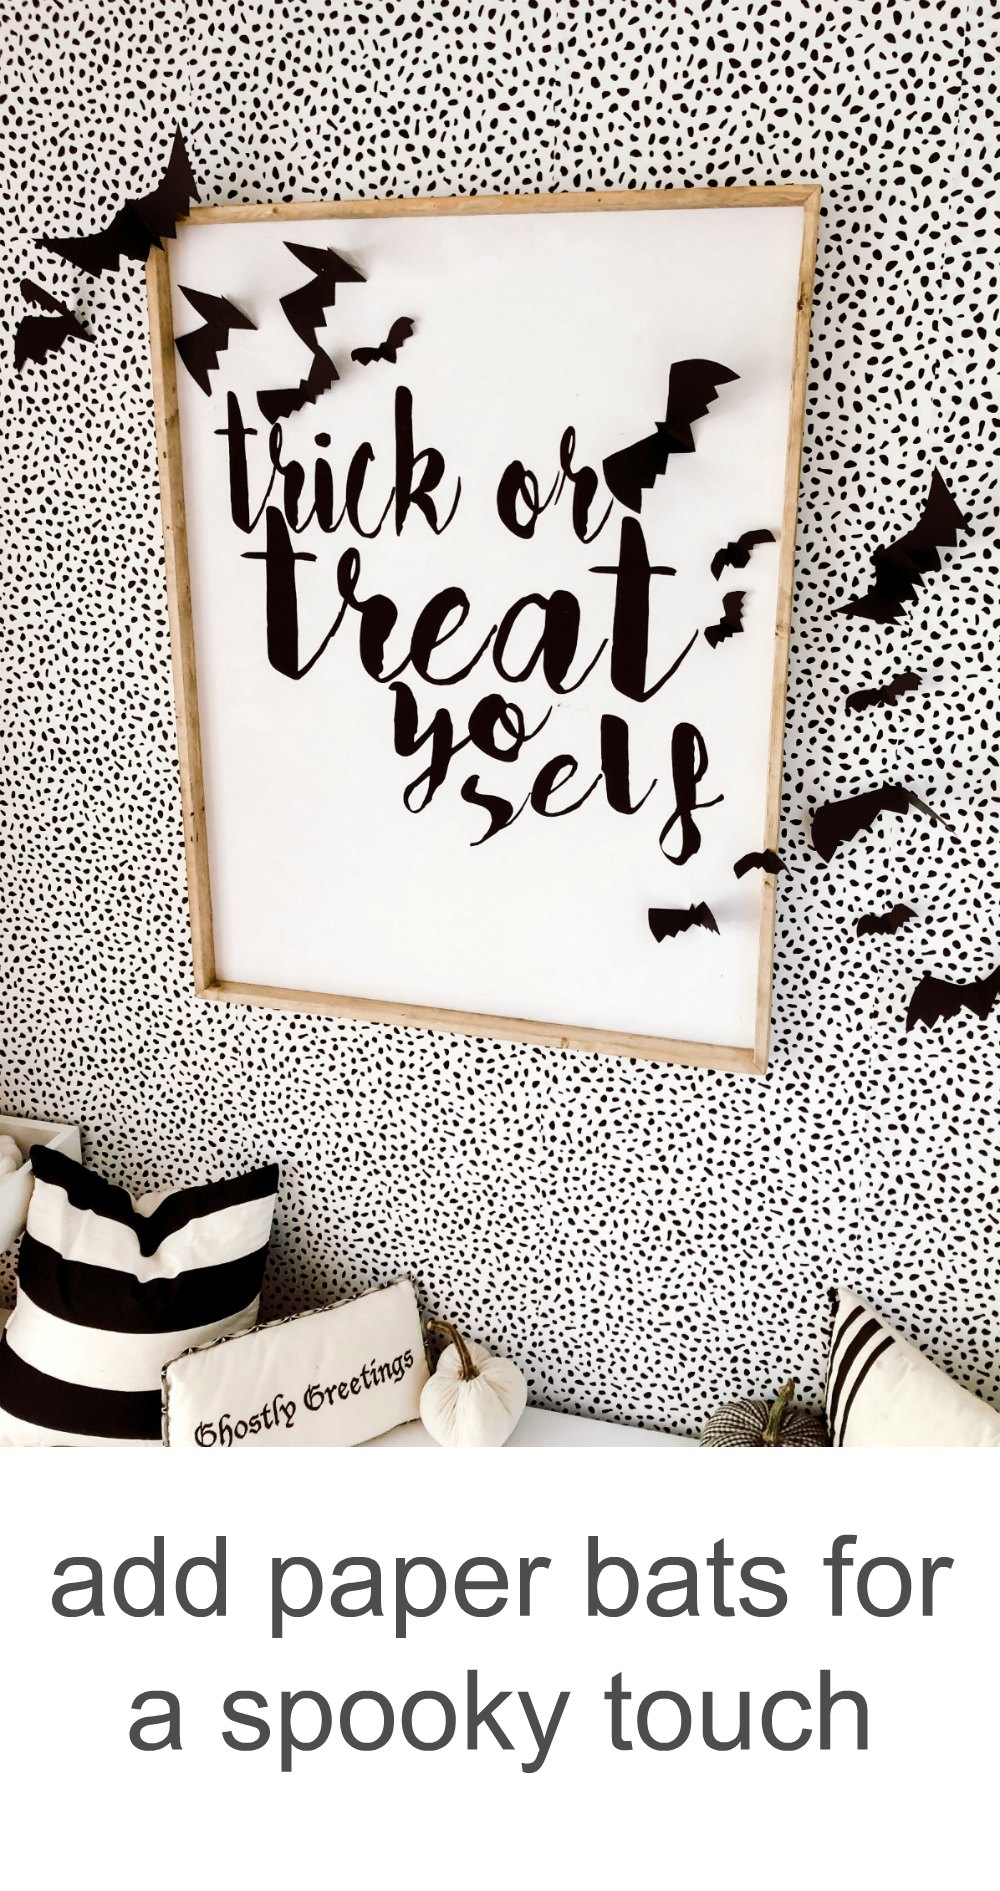 6 Ways to Create a Modern Farmhouse Halloween Entryway. Just because a space is small, doesn't mean it can't be BIG on style. Use removable wallpaper, spooky accents and an over-sized print to create a delightful Halloween space! 